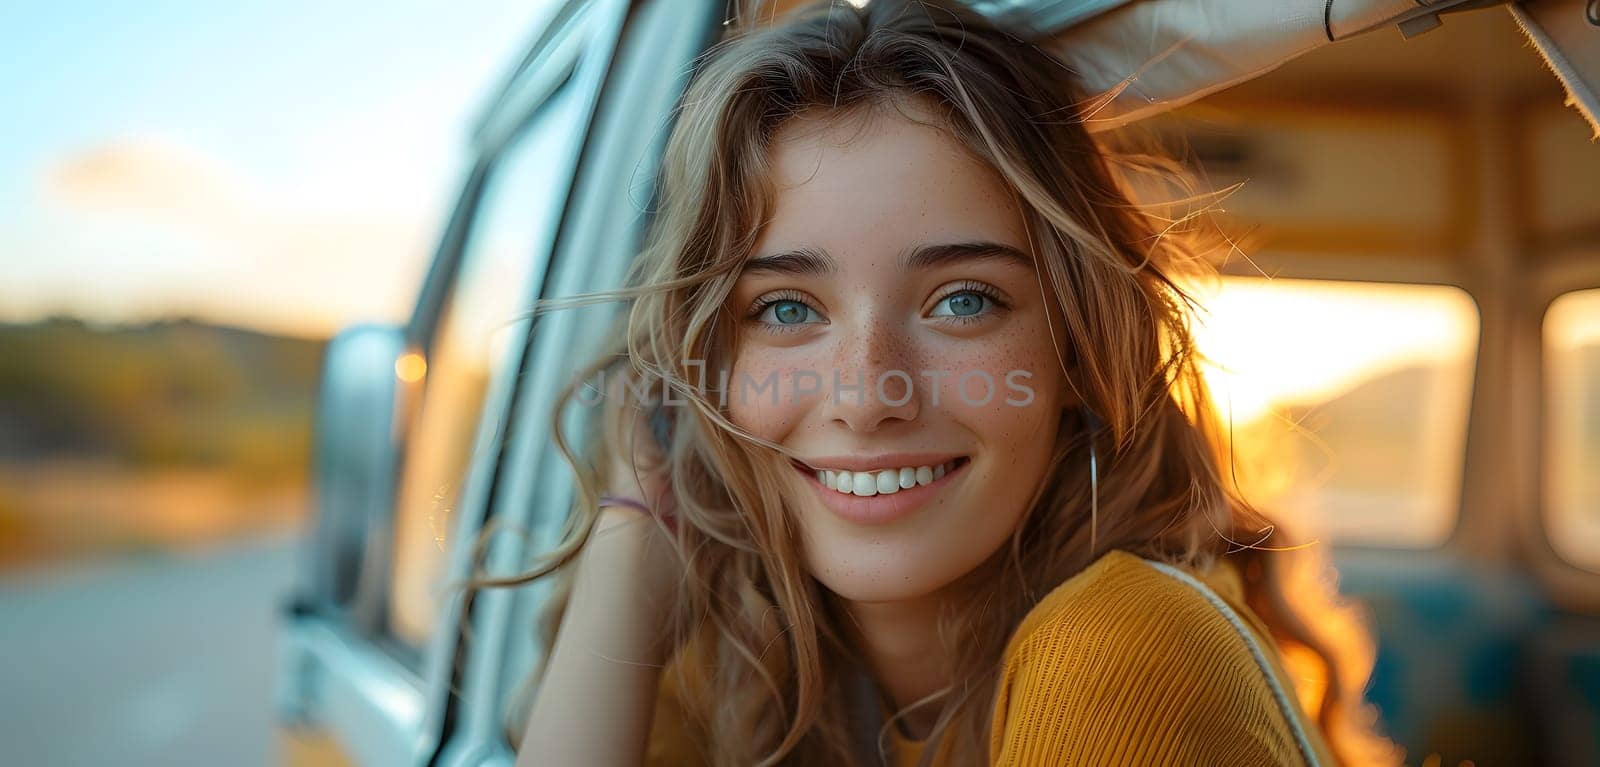 A young woman with layered blond hair and long eyelashes is smiling happily out of the window of a brown family car, enjoying the fun travel with her family